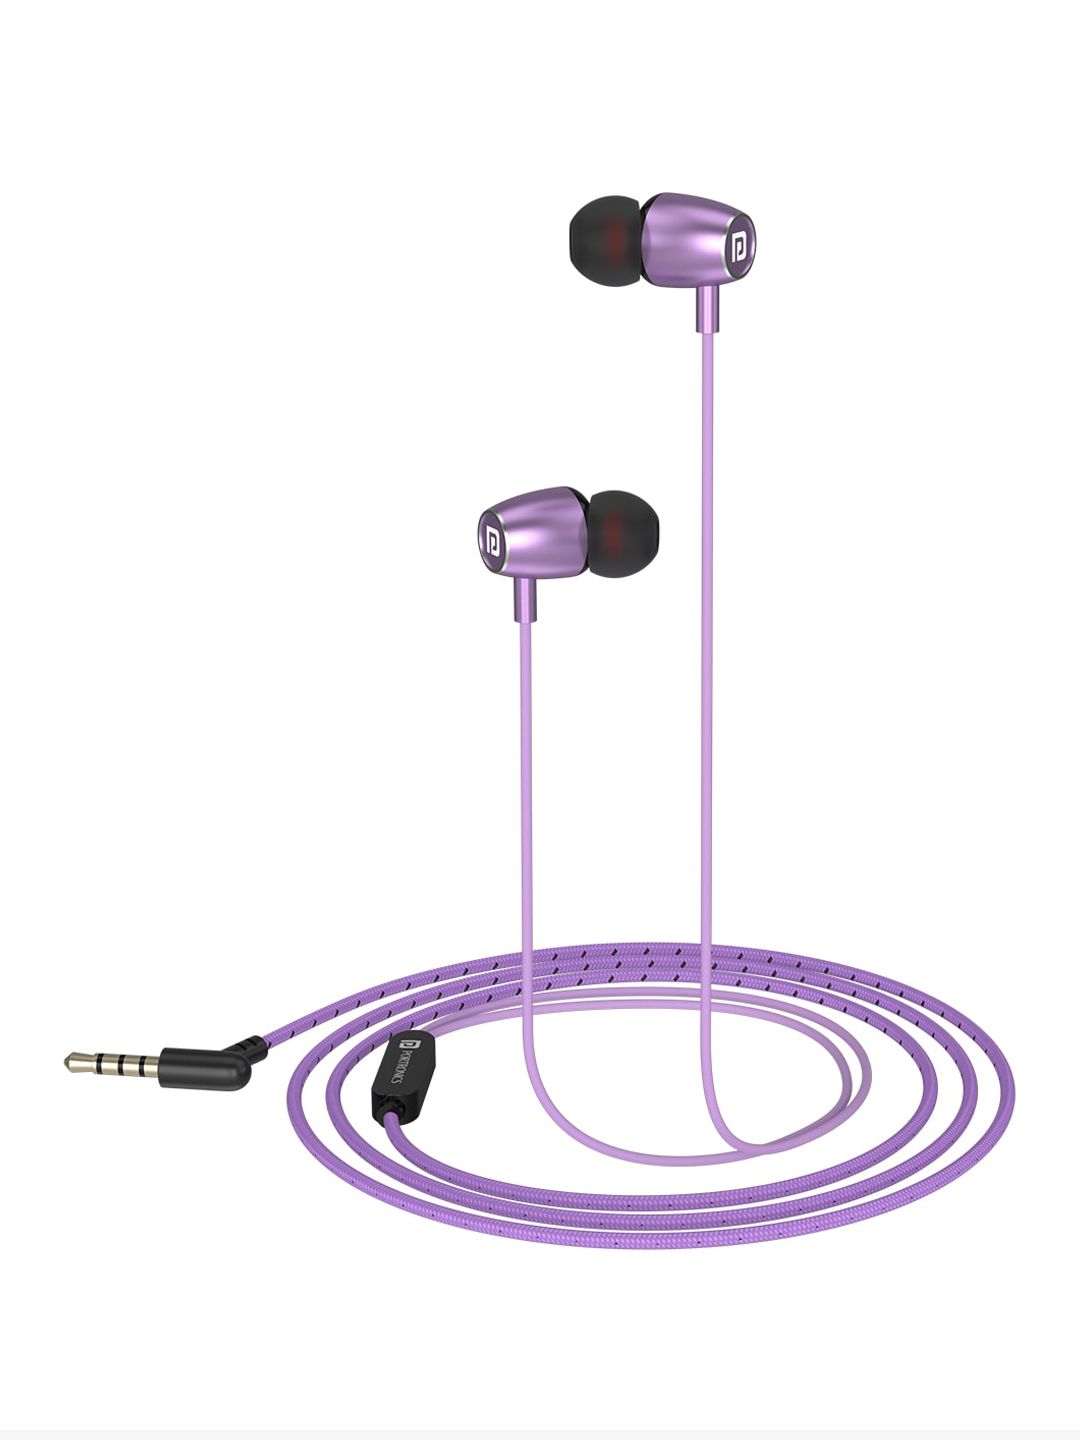 Portronics Purple Conch 80 In Ear Wired Earphones With Mic Price in India